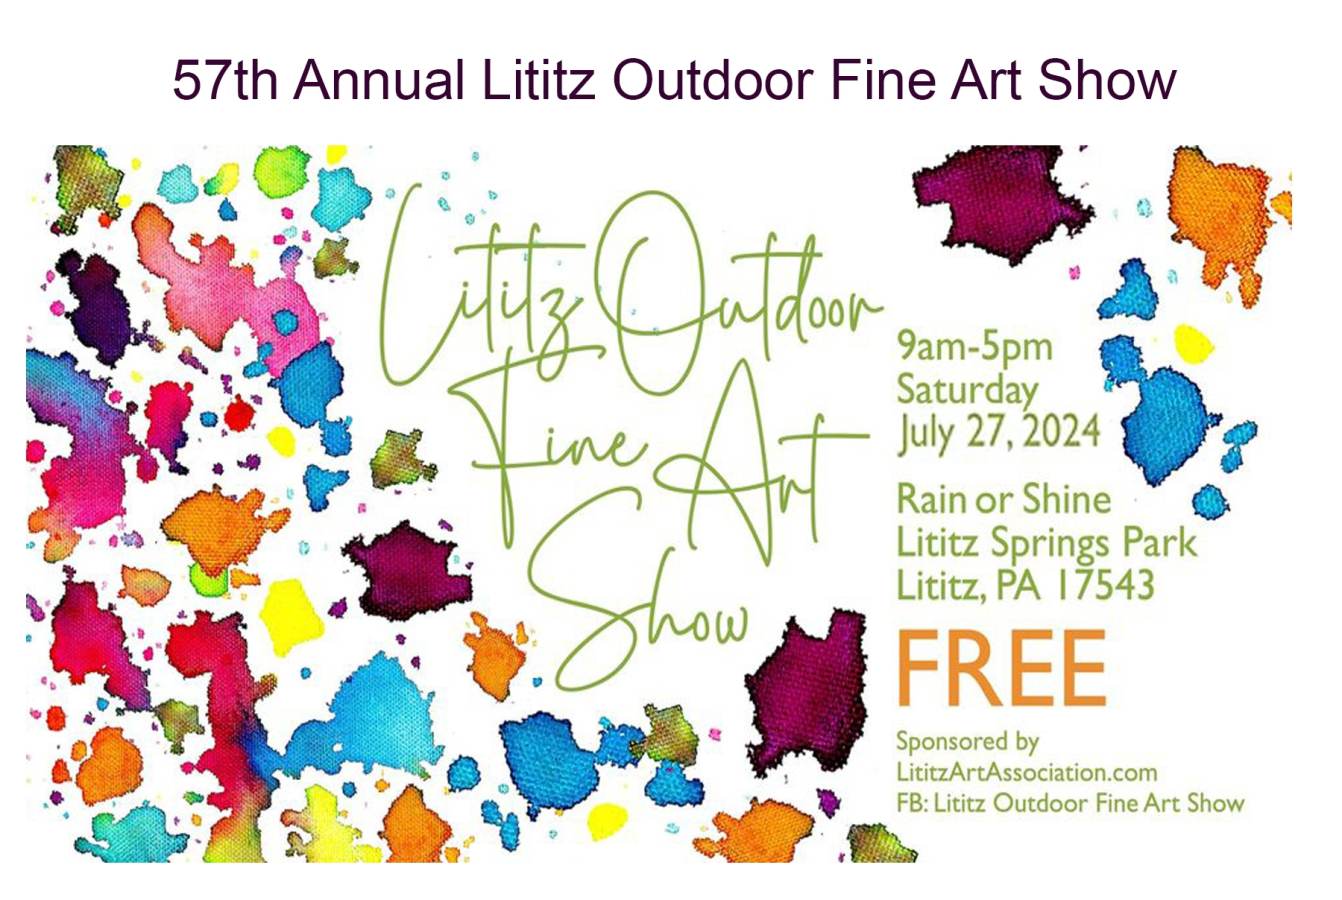 The 57th Annual Lititz Outdoor Fine Art Show Discover Lancaster